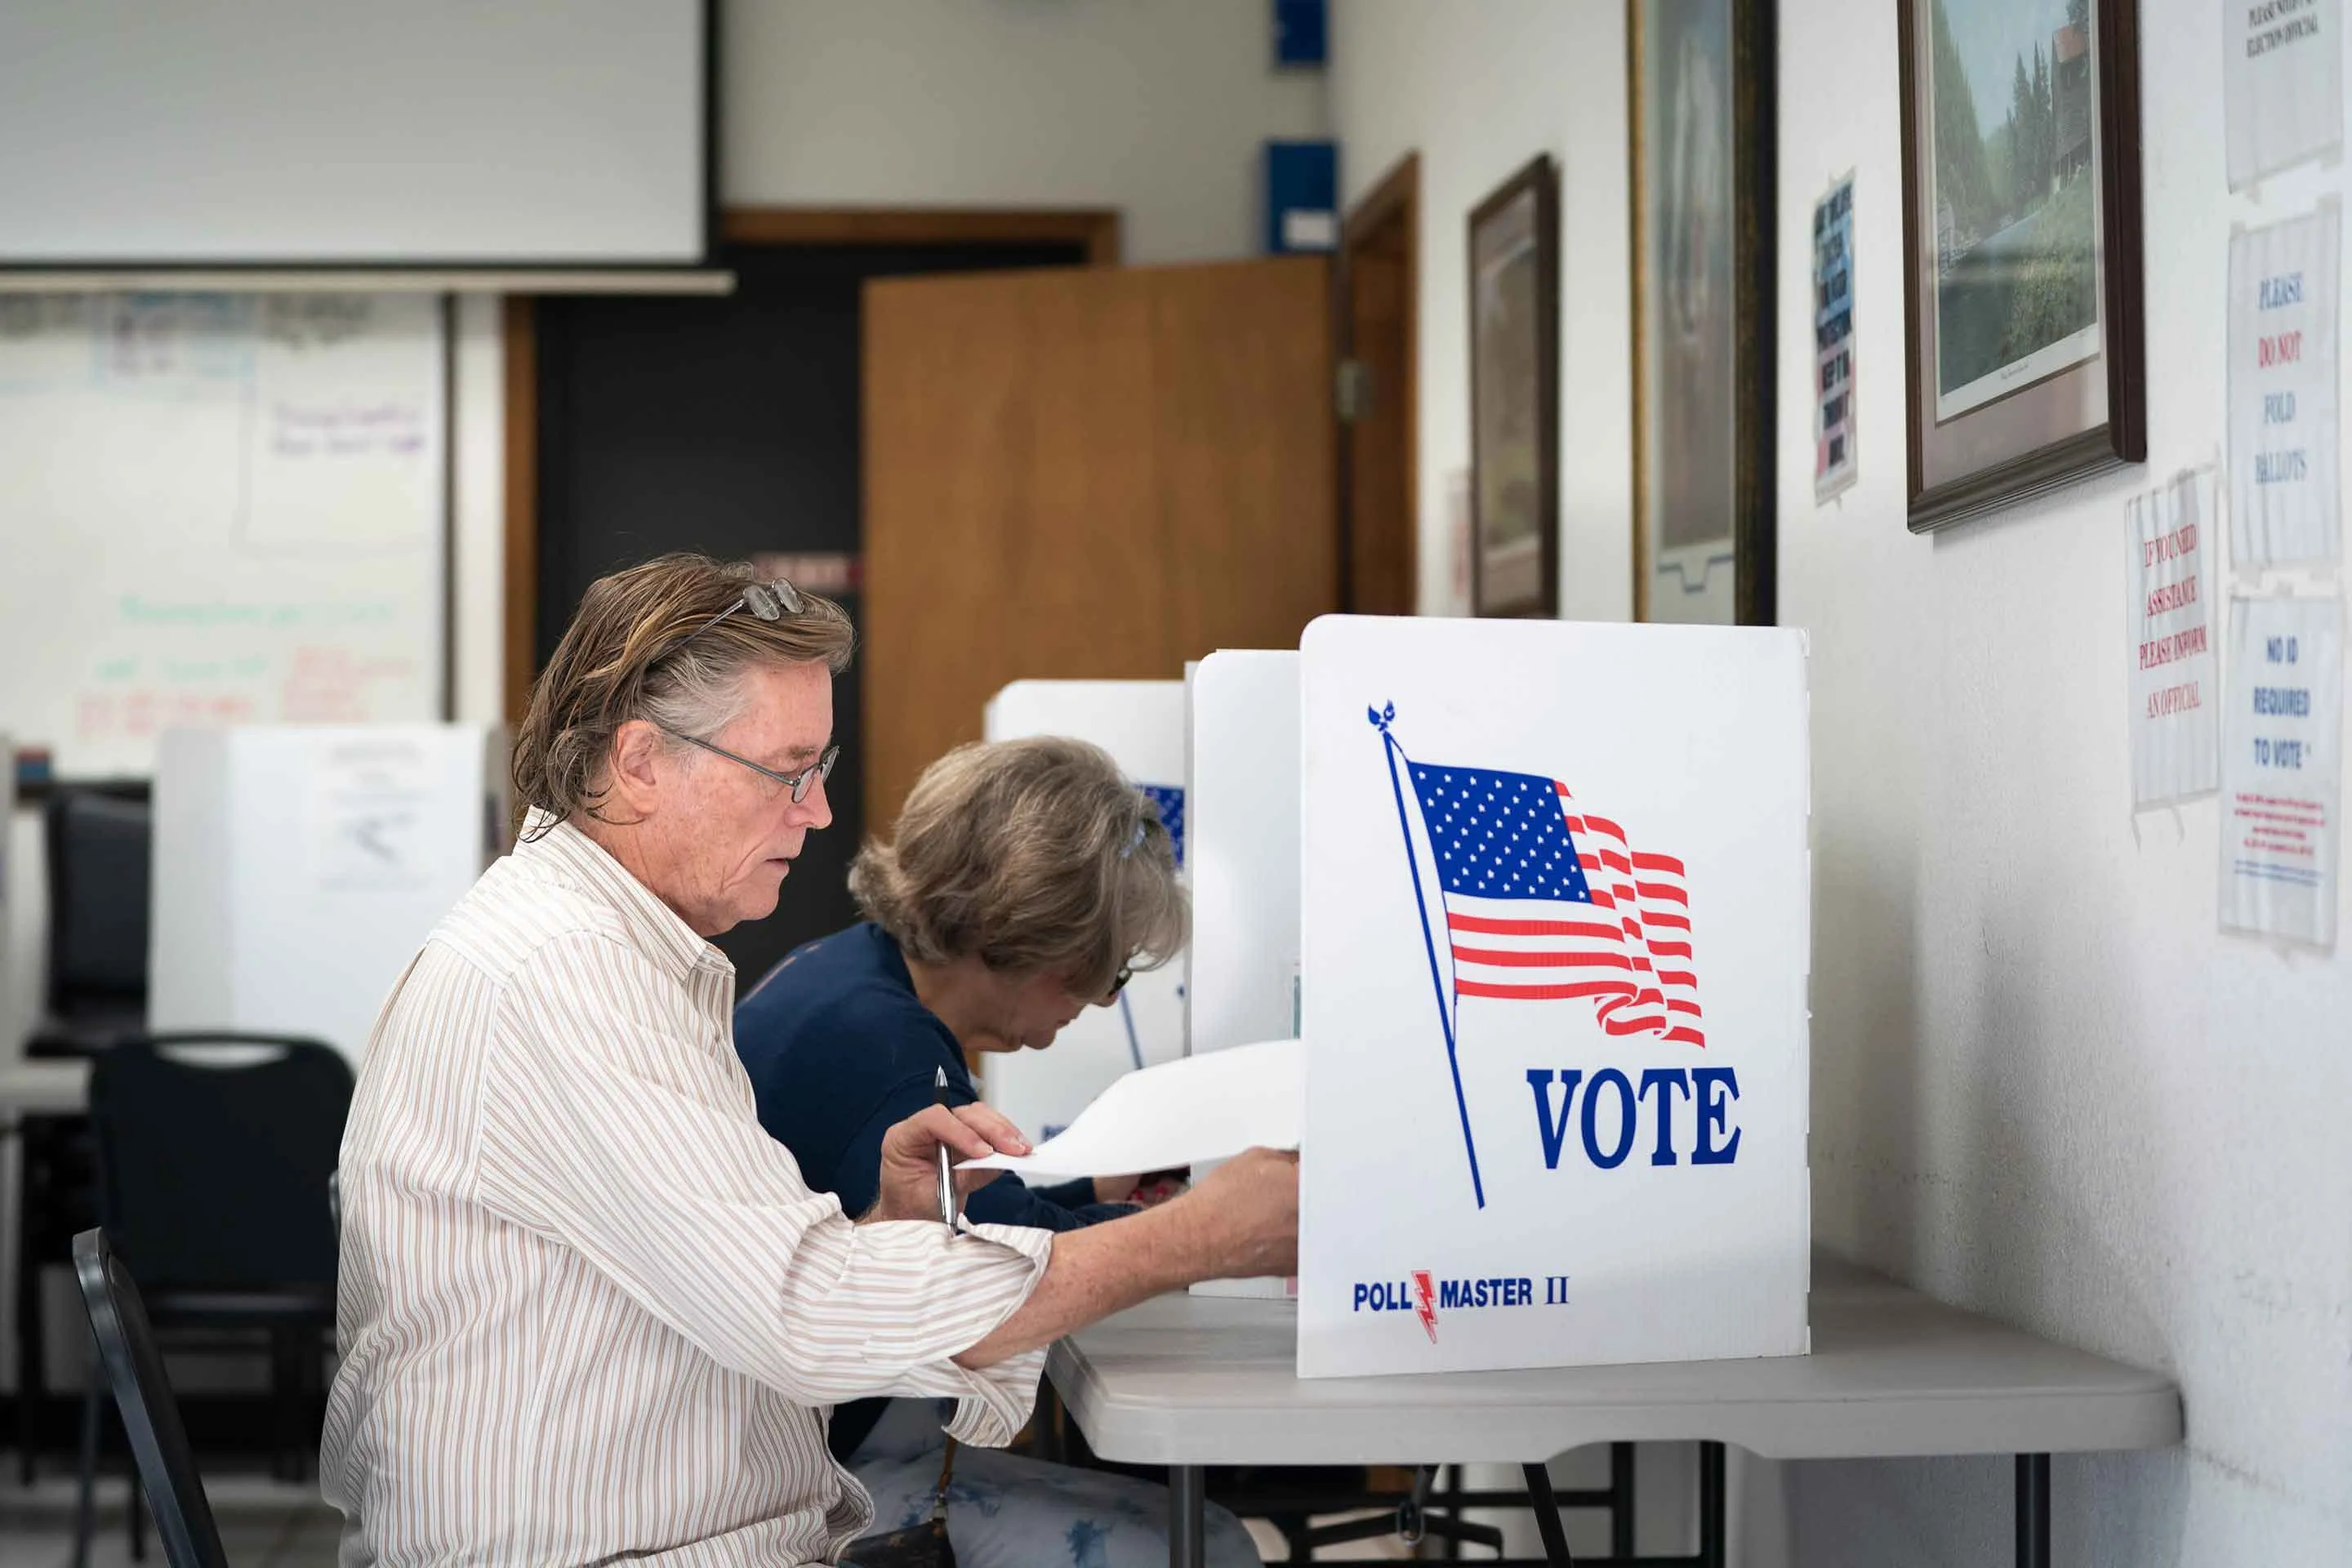 Does Your Job Have to Give You Time Off Work to Vote in the Midterm Elections?